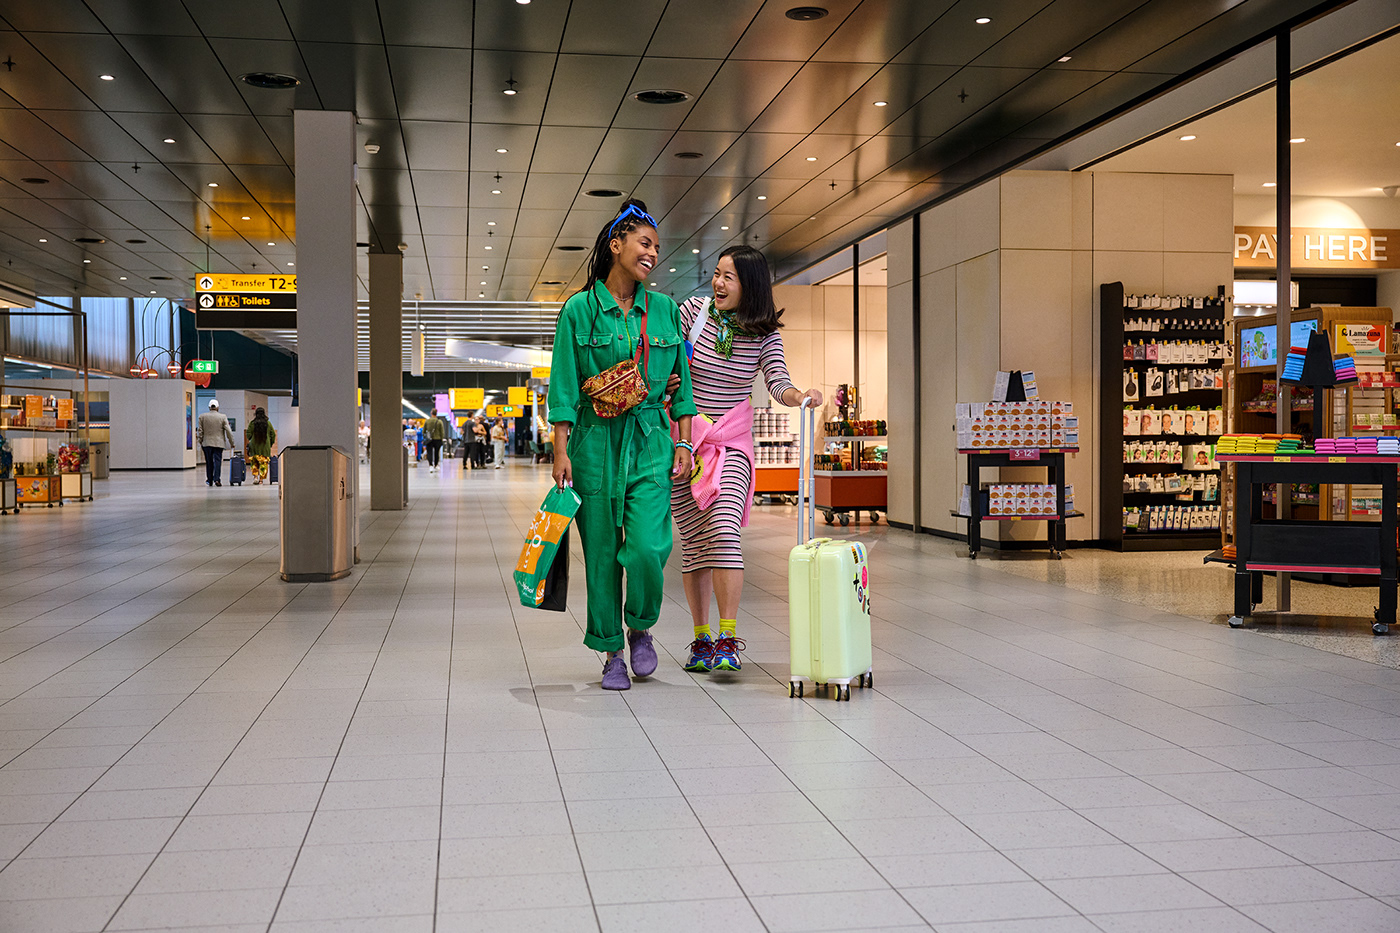 Two best friends are having fun while shopping on the airport together.